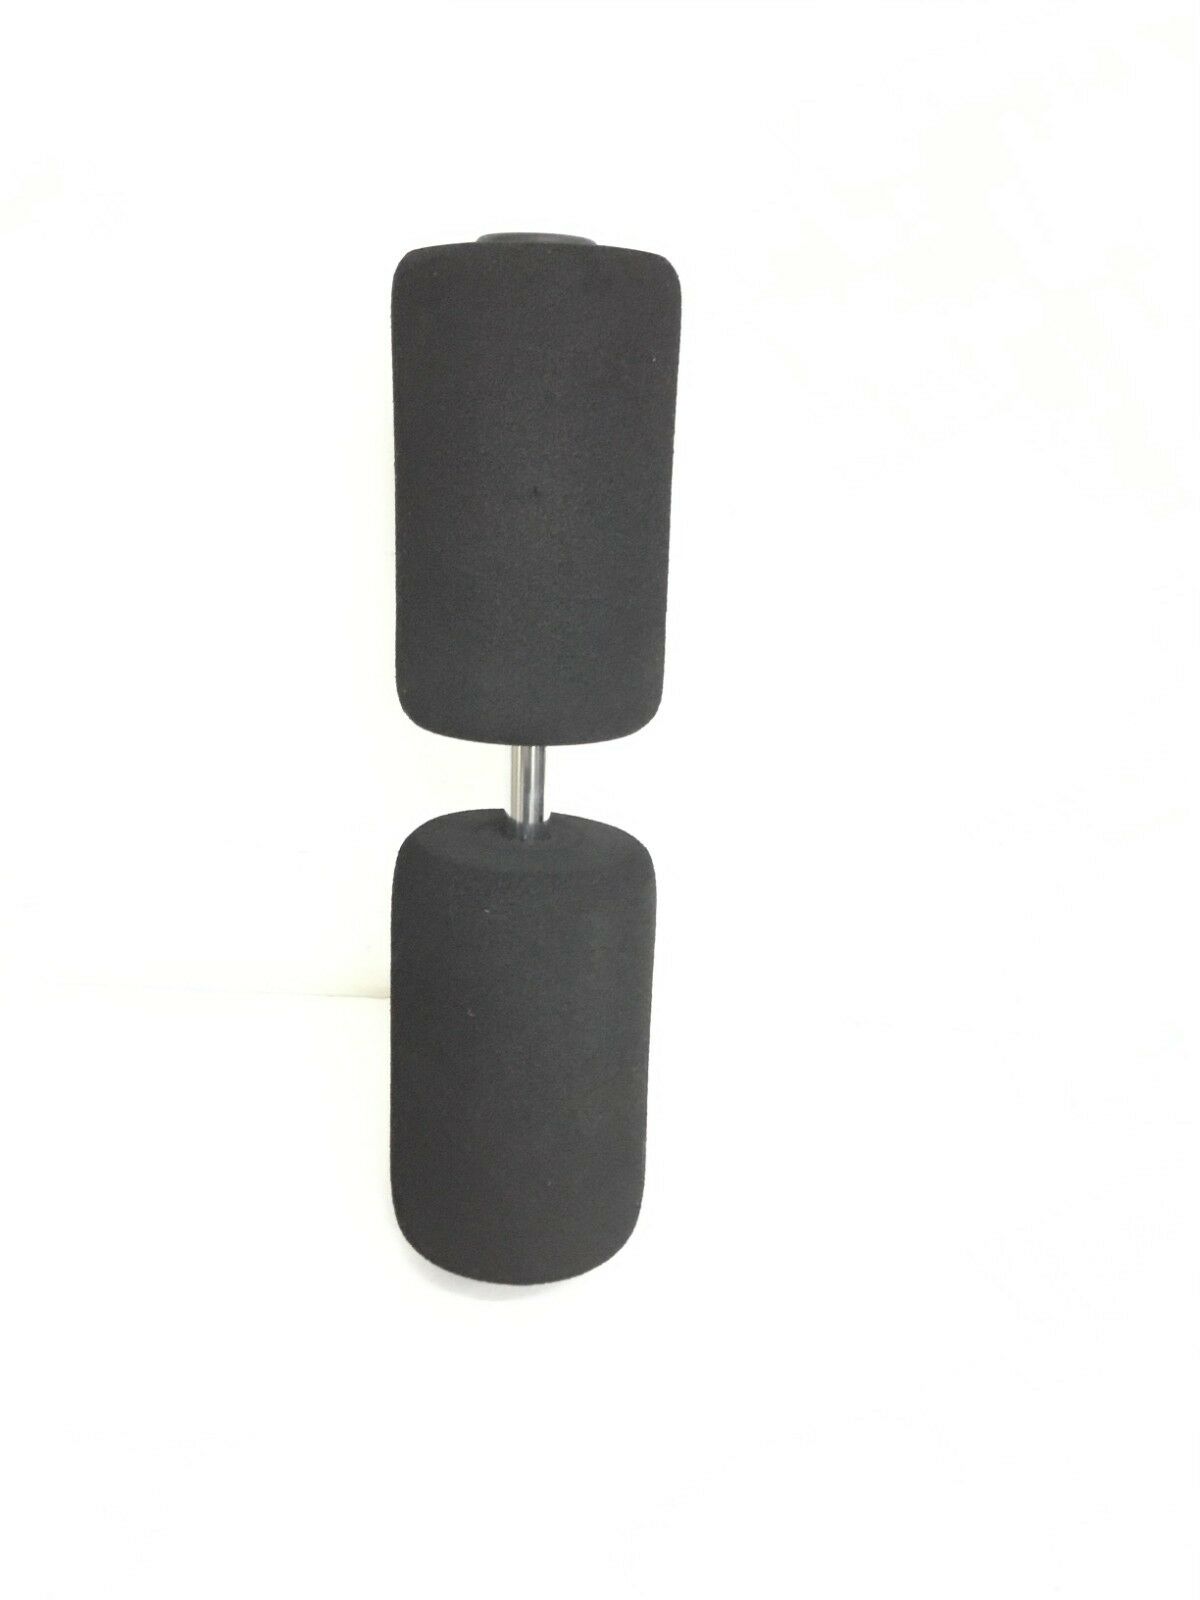 Leg Extension Pad Set with Shaft (Used)